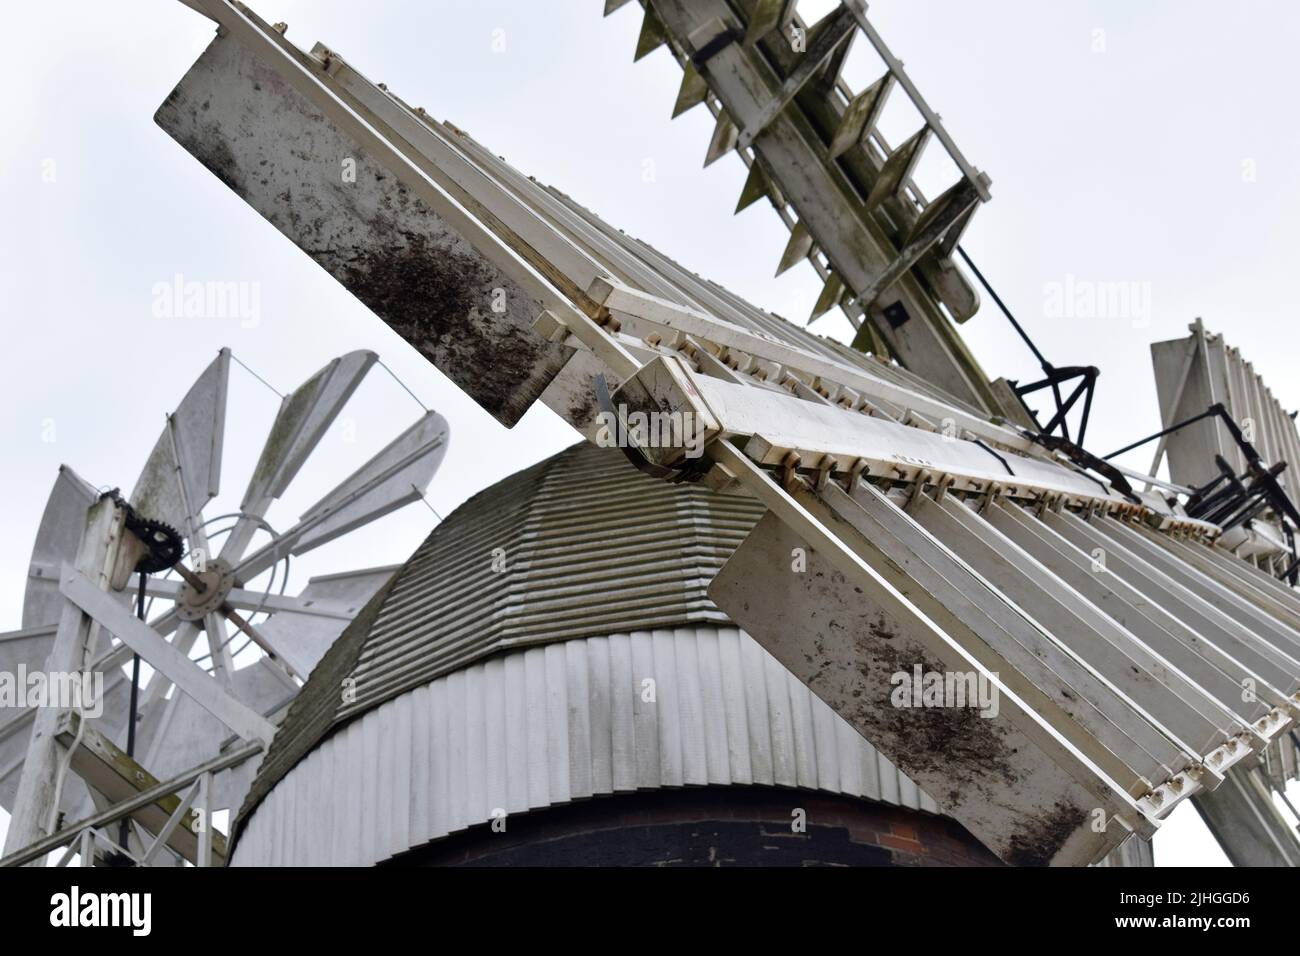 exterior of bardwell mill, suffolk, england Stock Photo